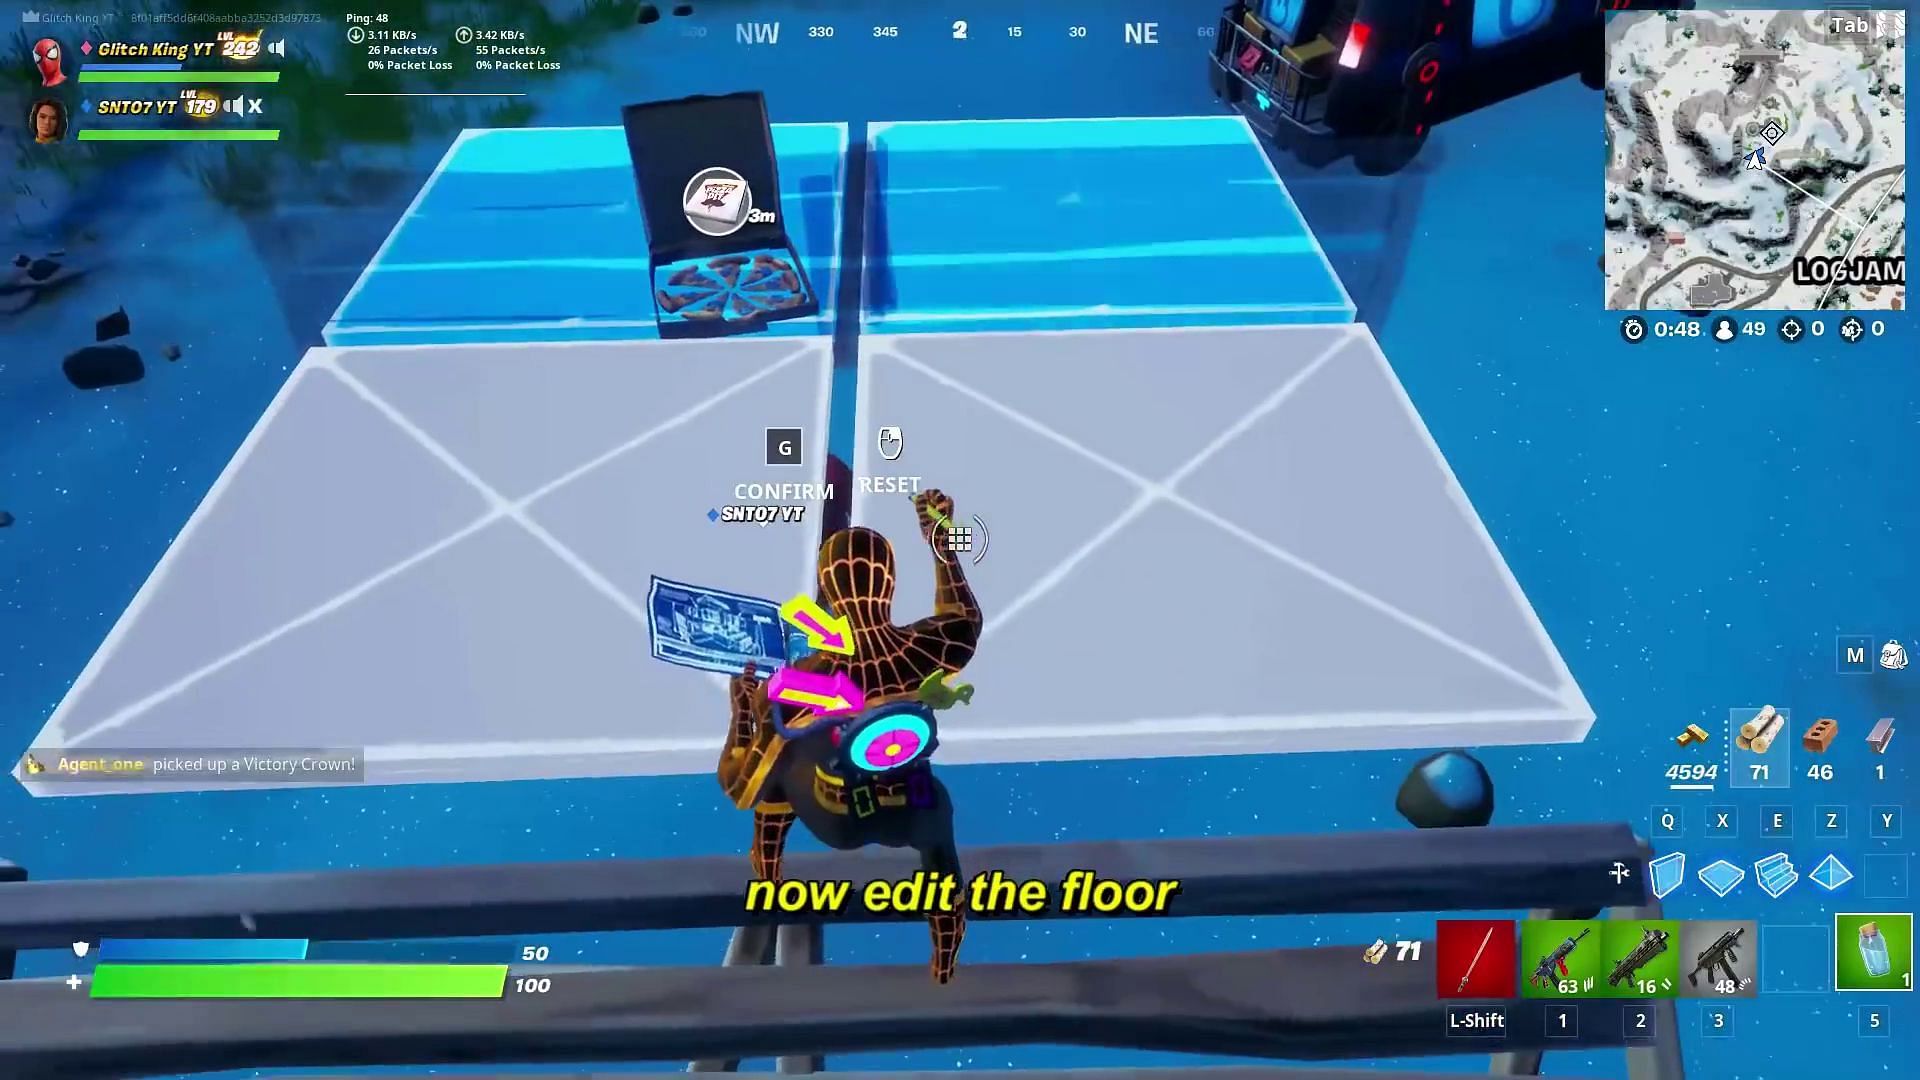 The YouTuber edits the floor piece to make the Pizza Party box fall over the Snowman (Image via YouTube/GKI)